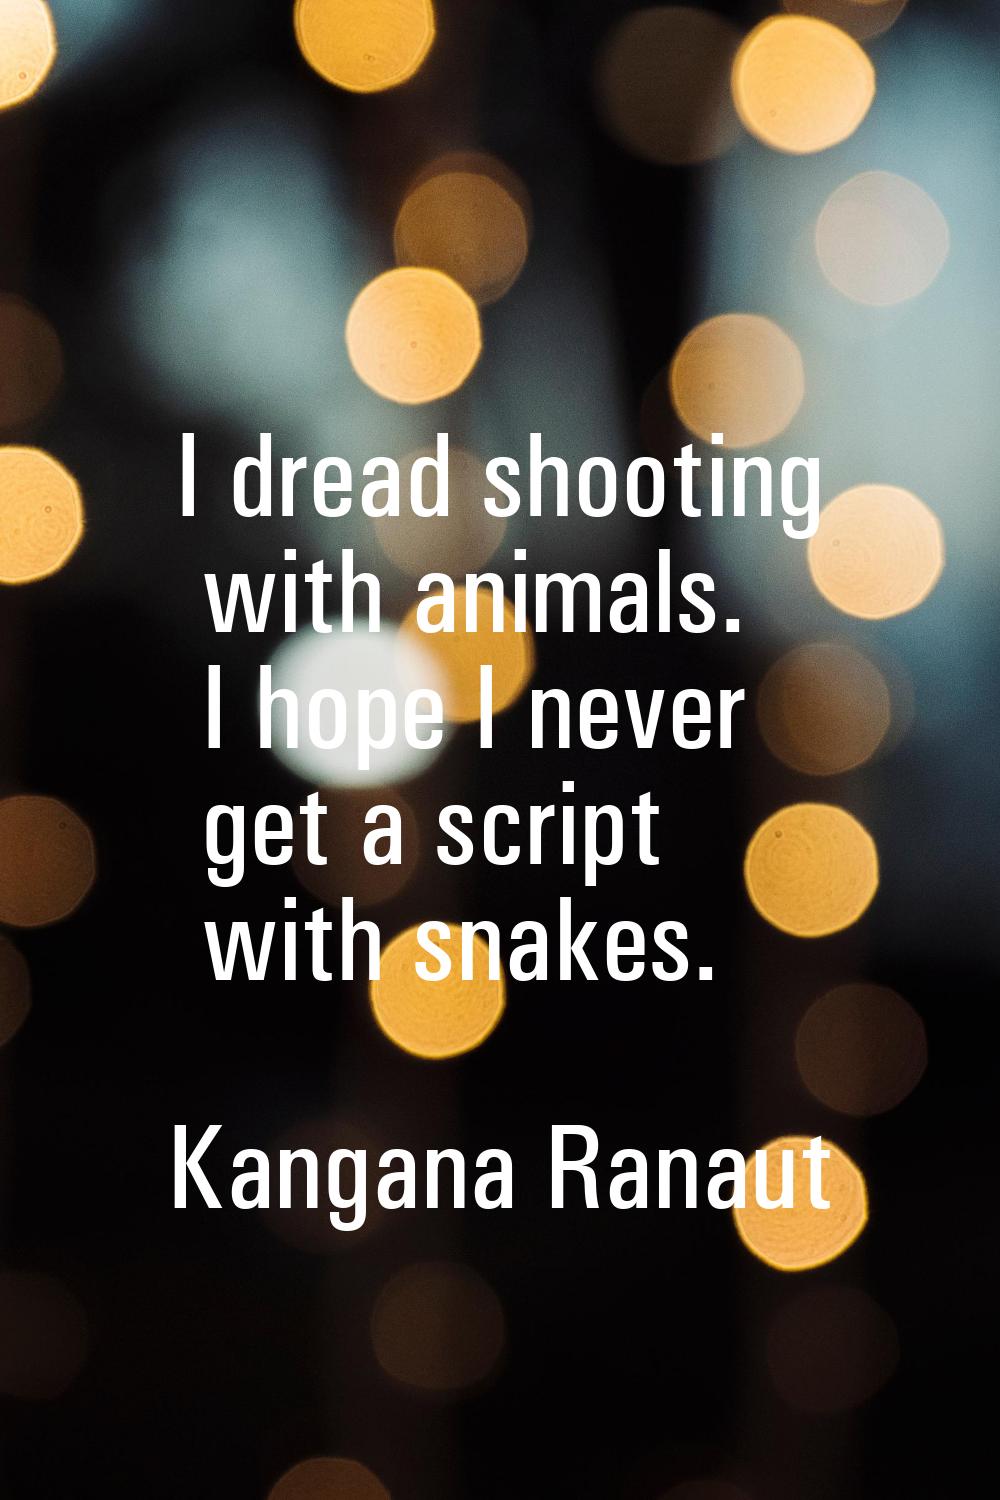 I dread shooting with animals. I hope I never get a script with snakes.